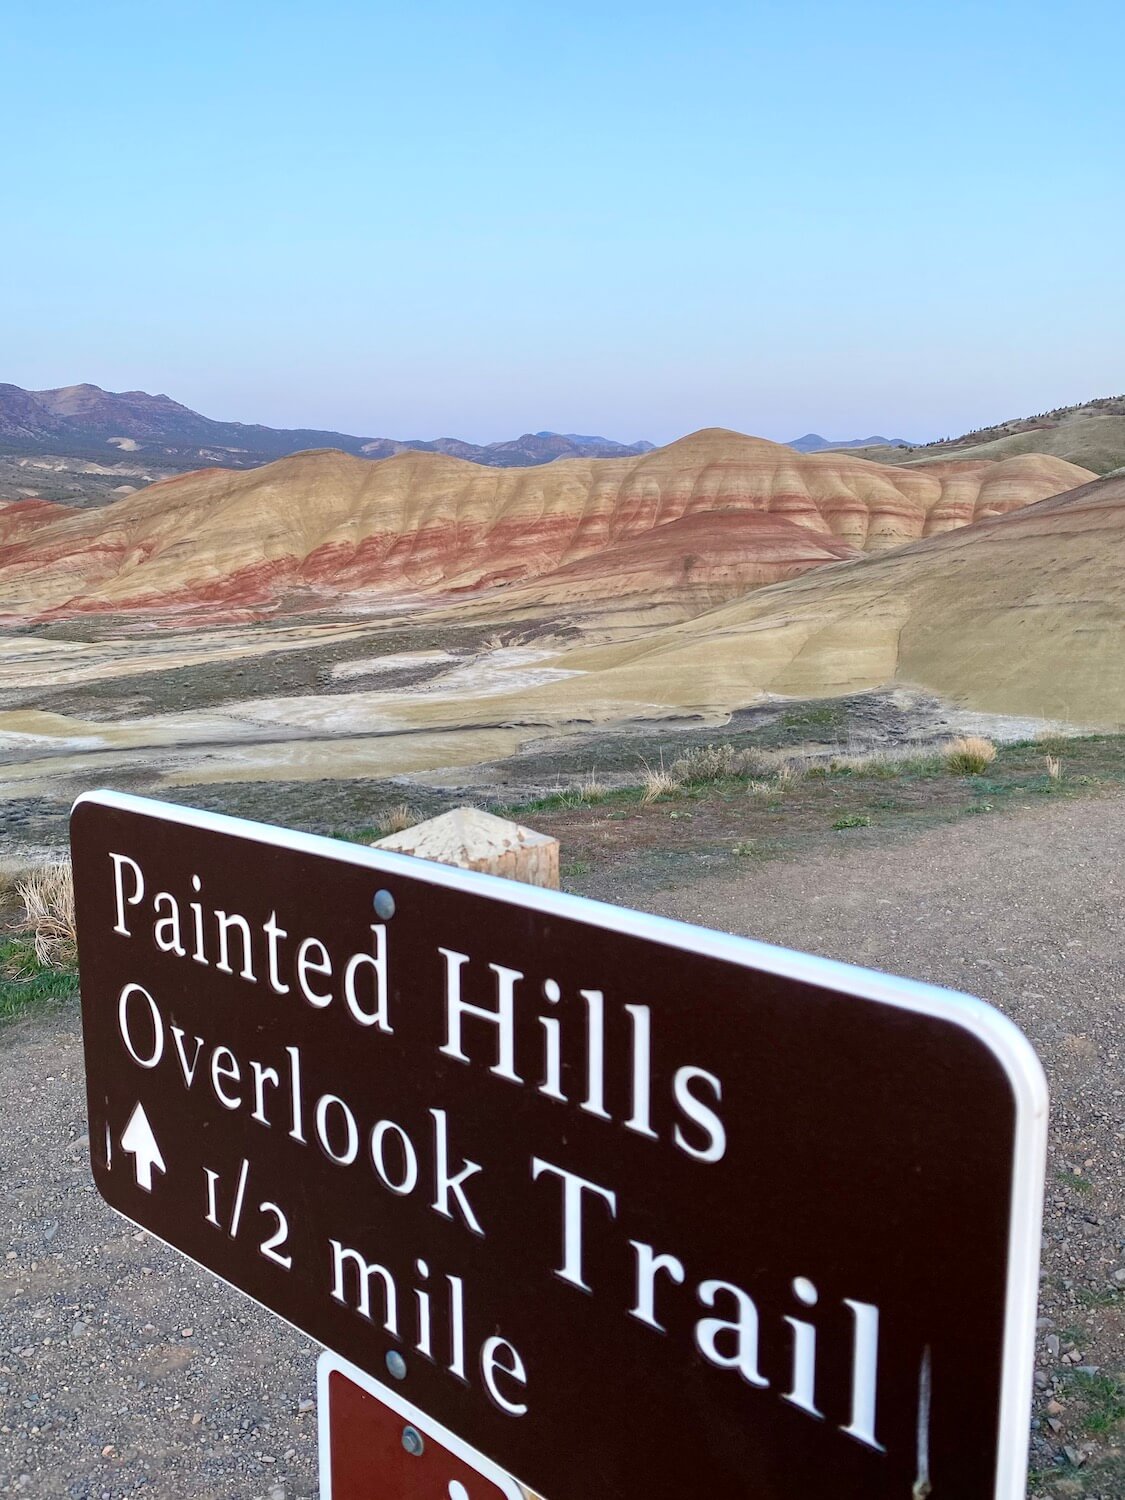 This photo of the Painted Hills Overlook Trail shows a near sunset view of the flowing mounds of soil rich with diverse colors and textures in the distance.  